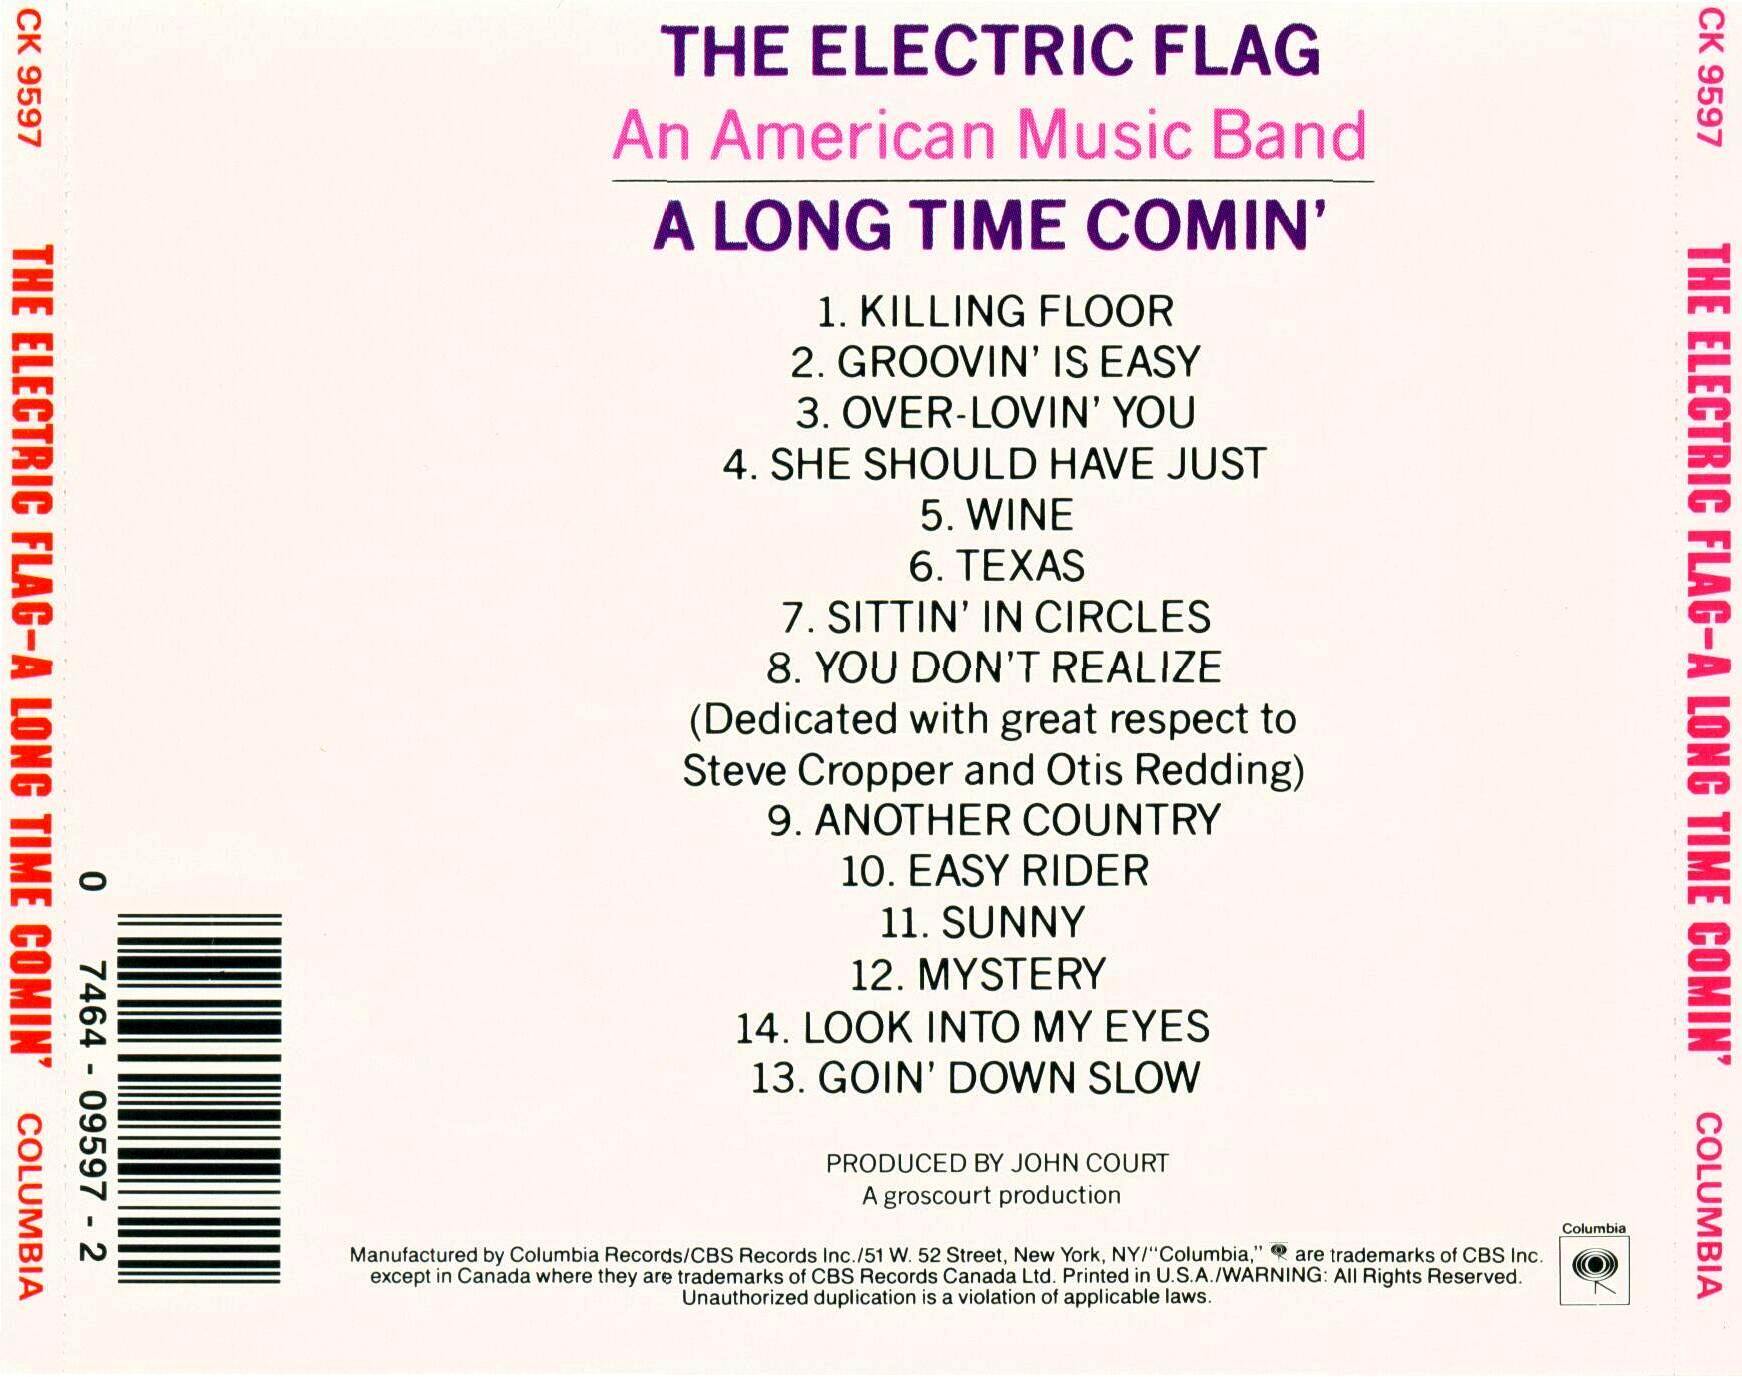 The Electric Flag - A Long Time Comin' - 1968